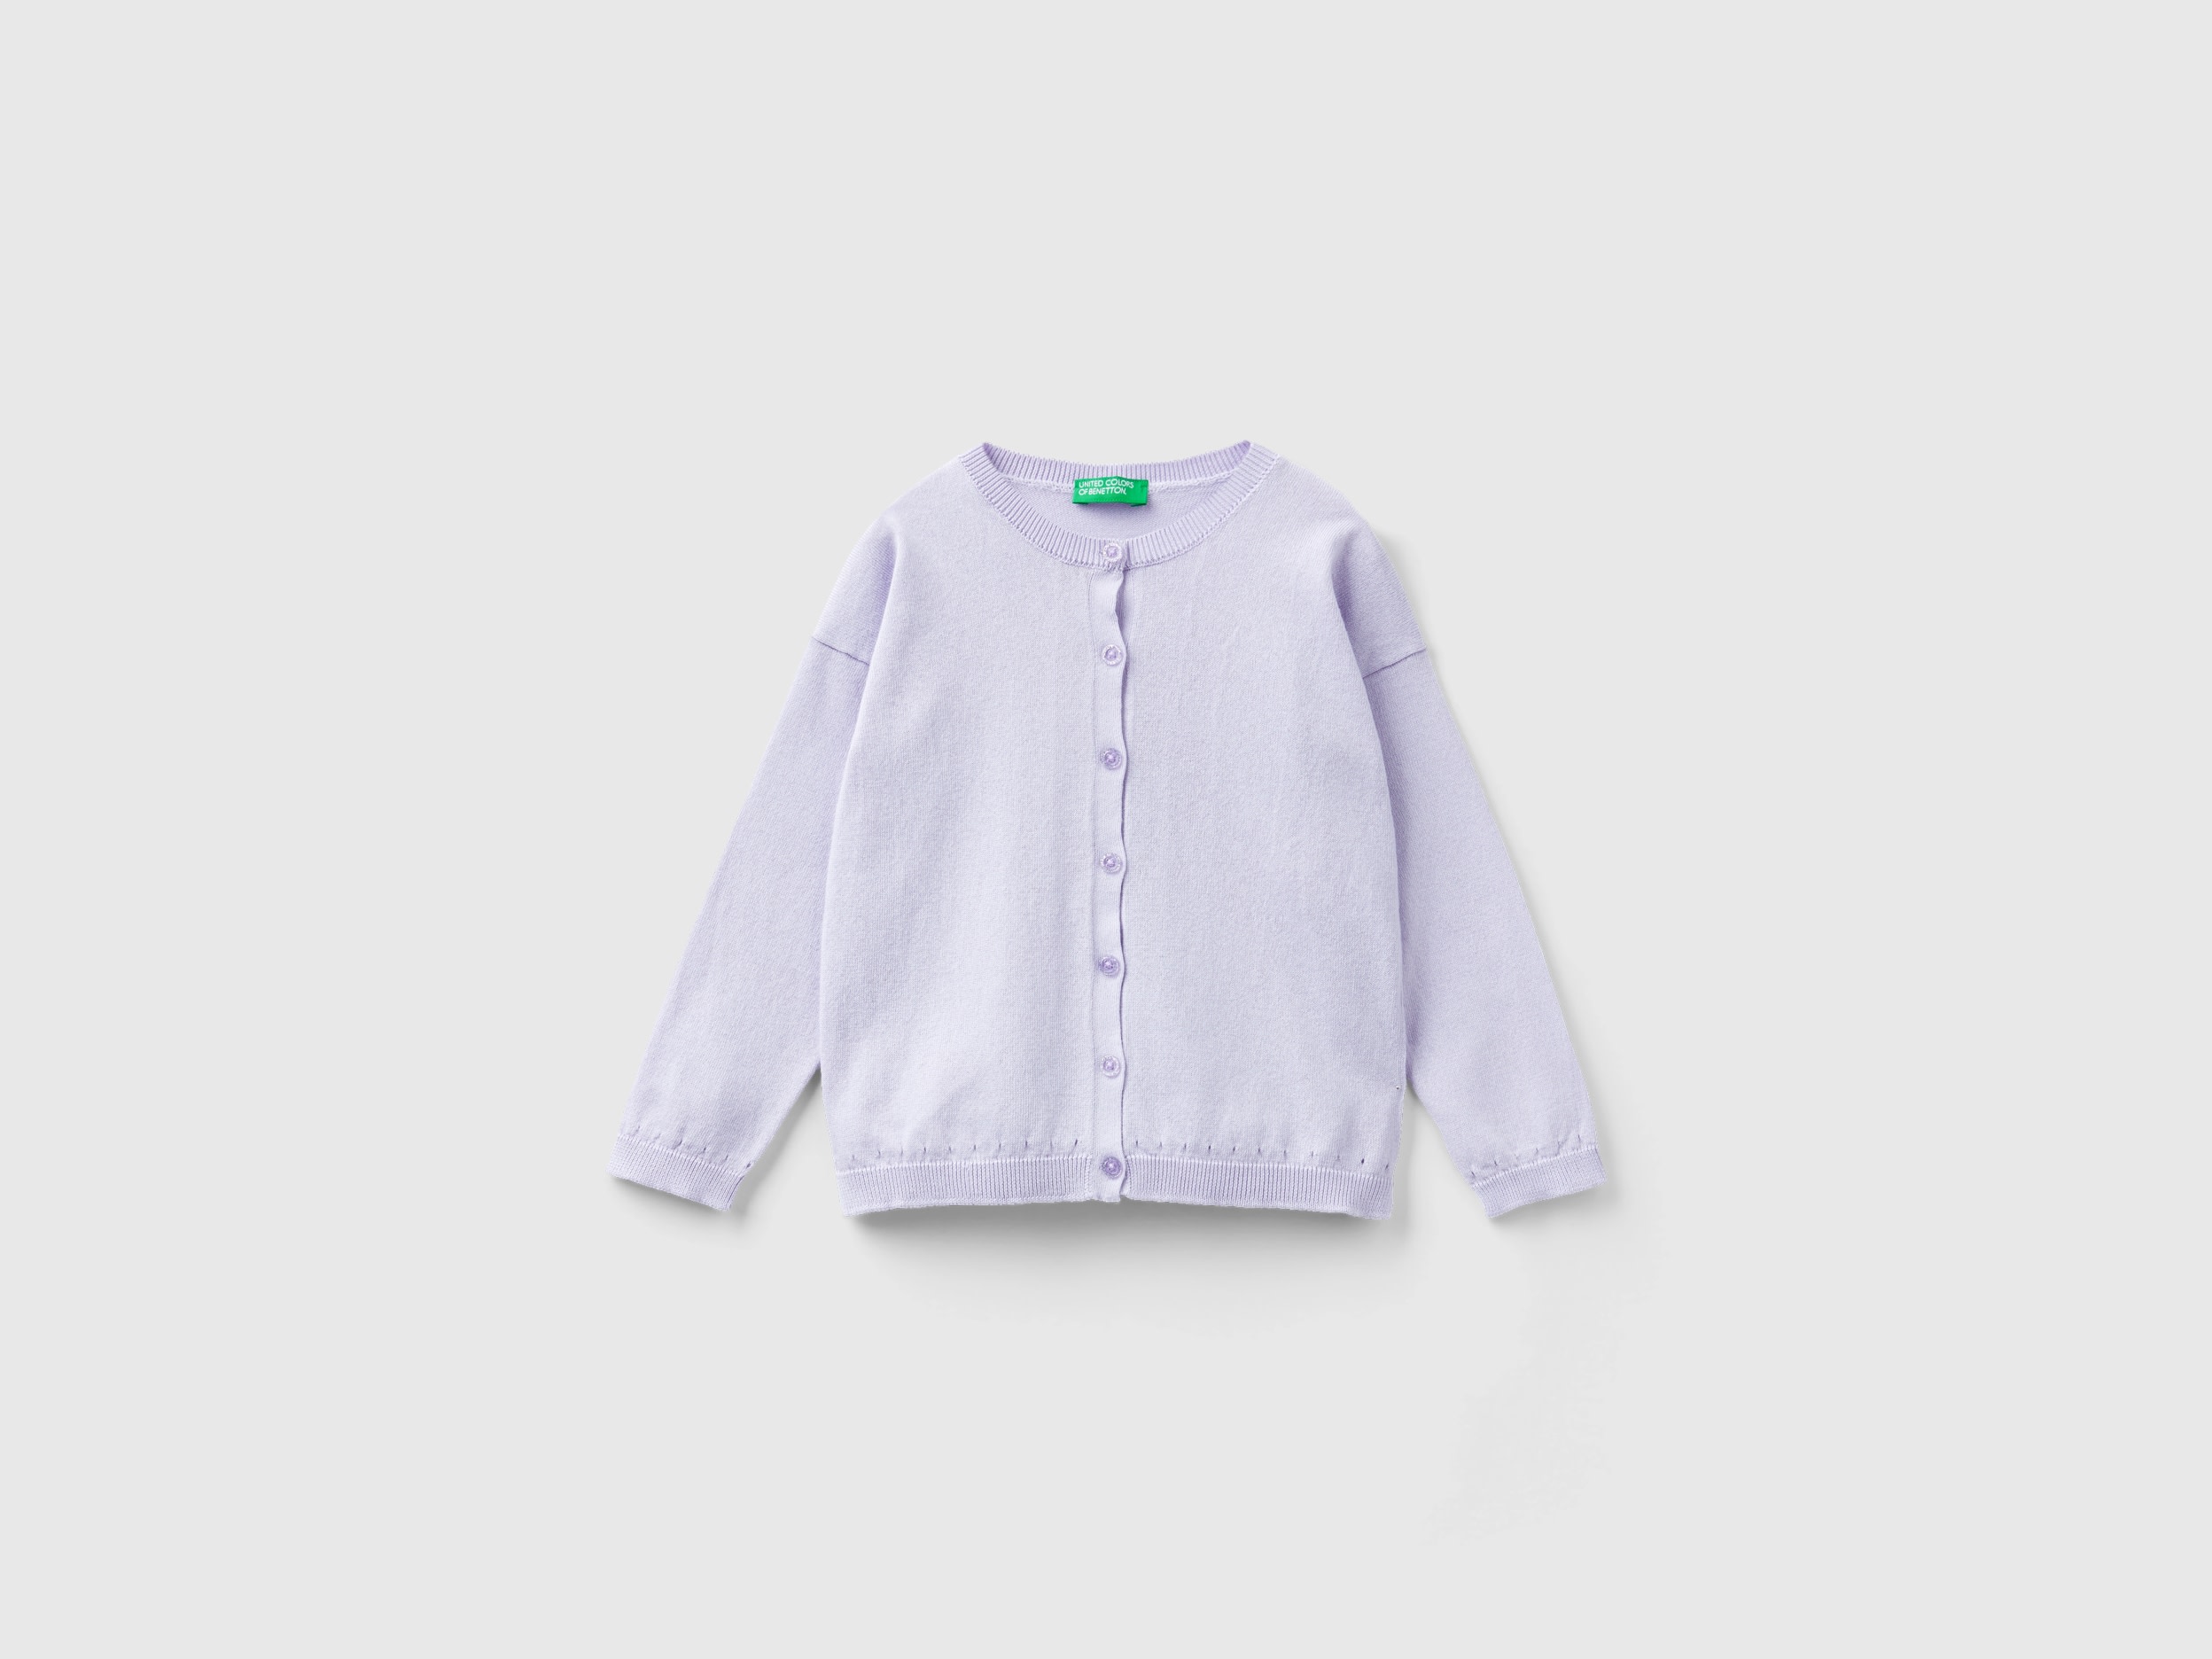 Benetton, Cardigan With Glittery Buttons, size 2-3, Lilac, Kids